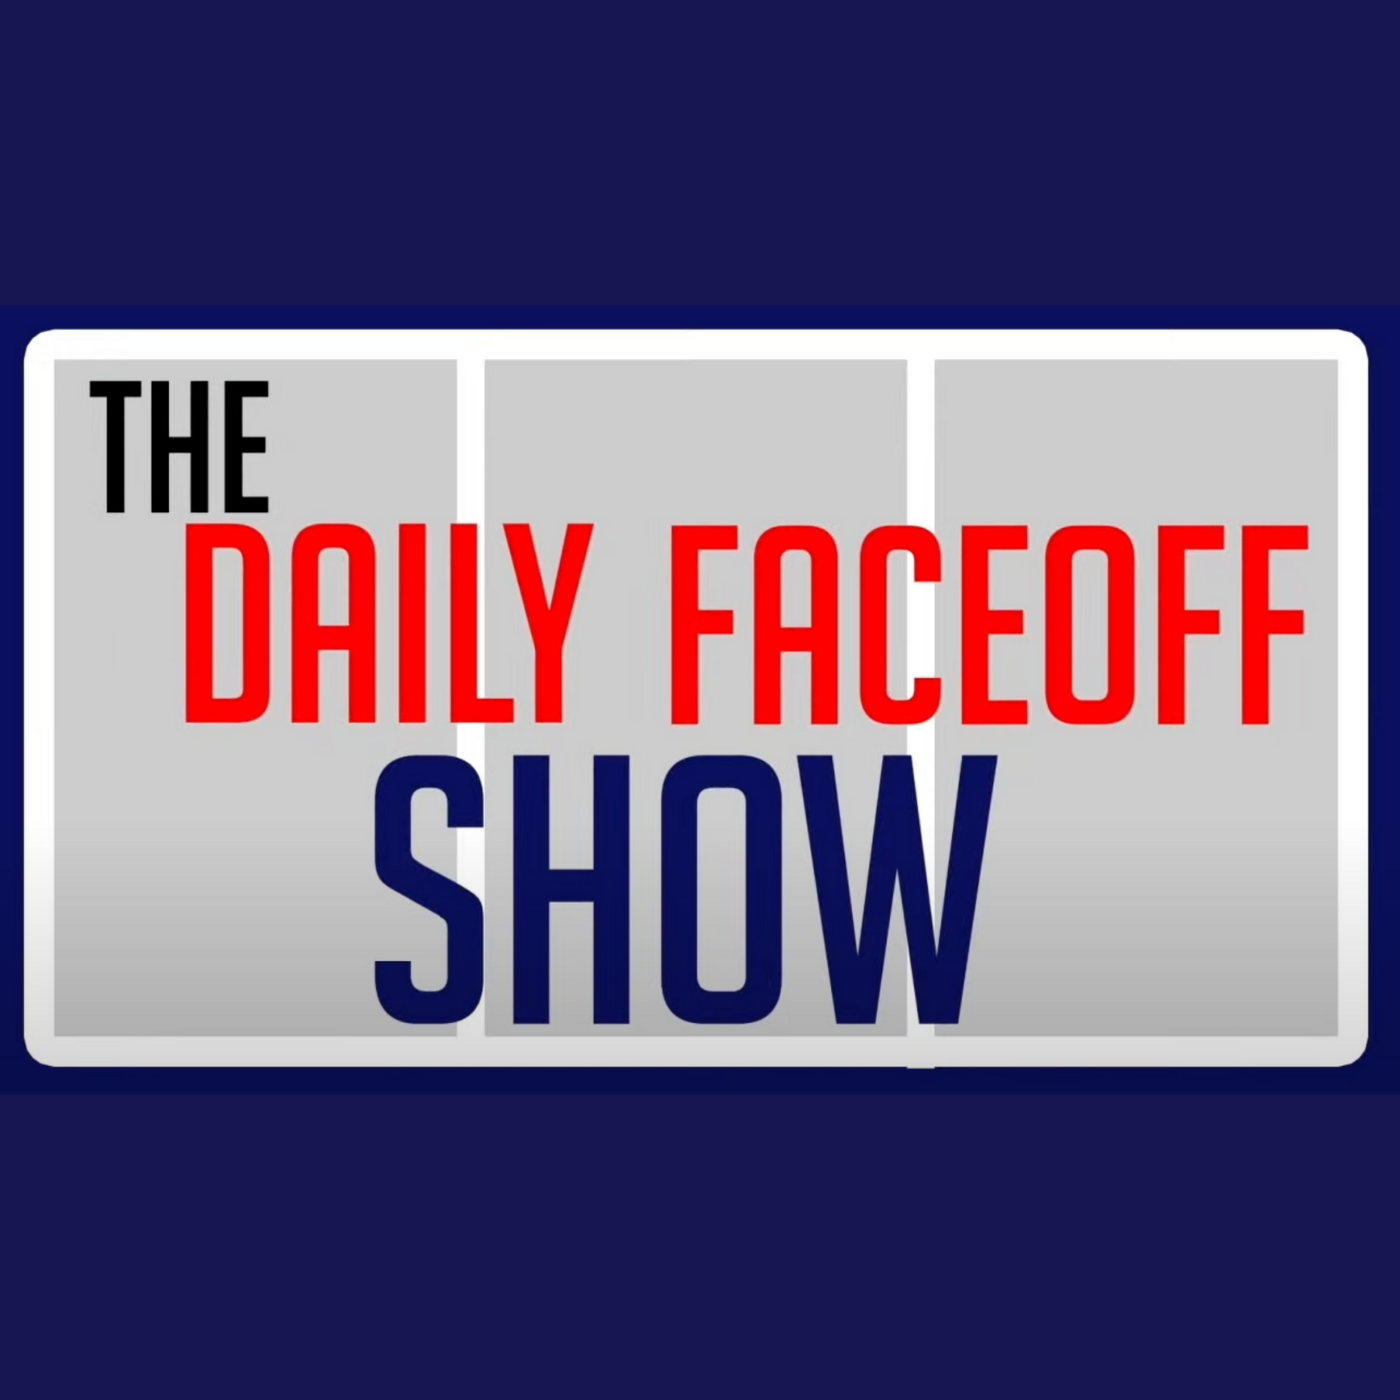 June 27th - The Daily Faceoff Show - Feat. Tyler Yaremchuk & Mike McKenna